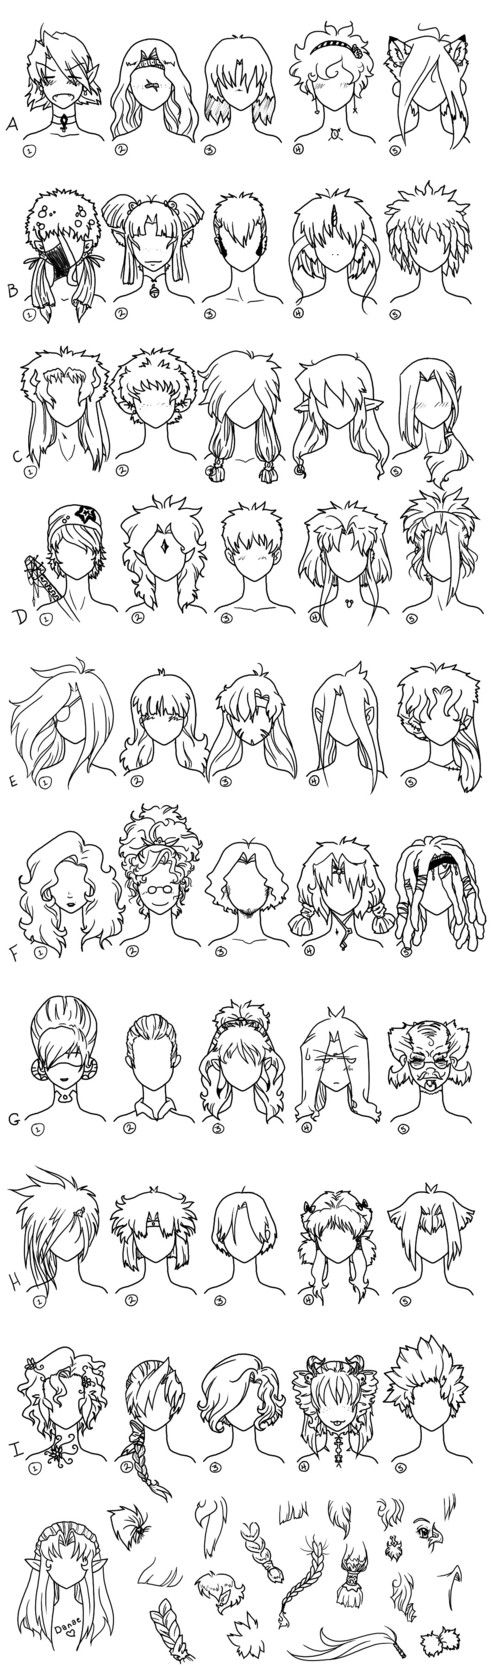 A large chart of hair style ideas for when creating an anime/manga character. There are some very interesting hair styles shown here! (laugh)